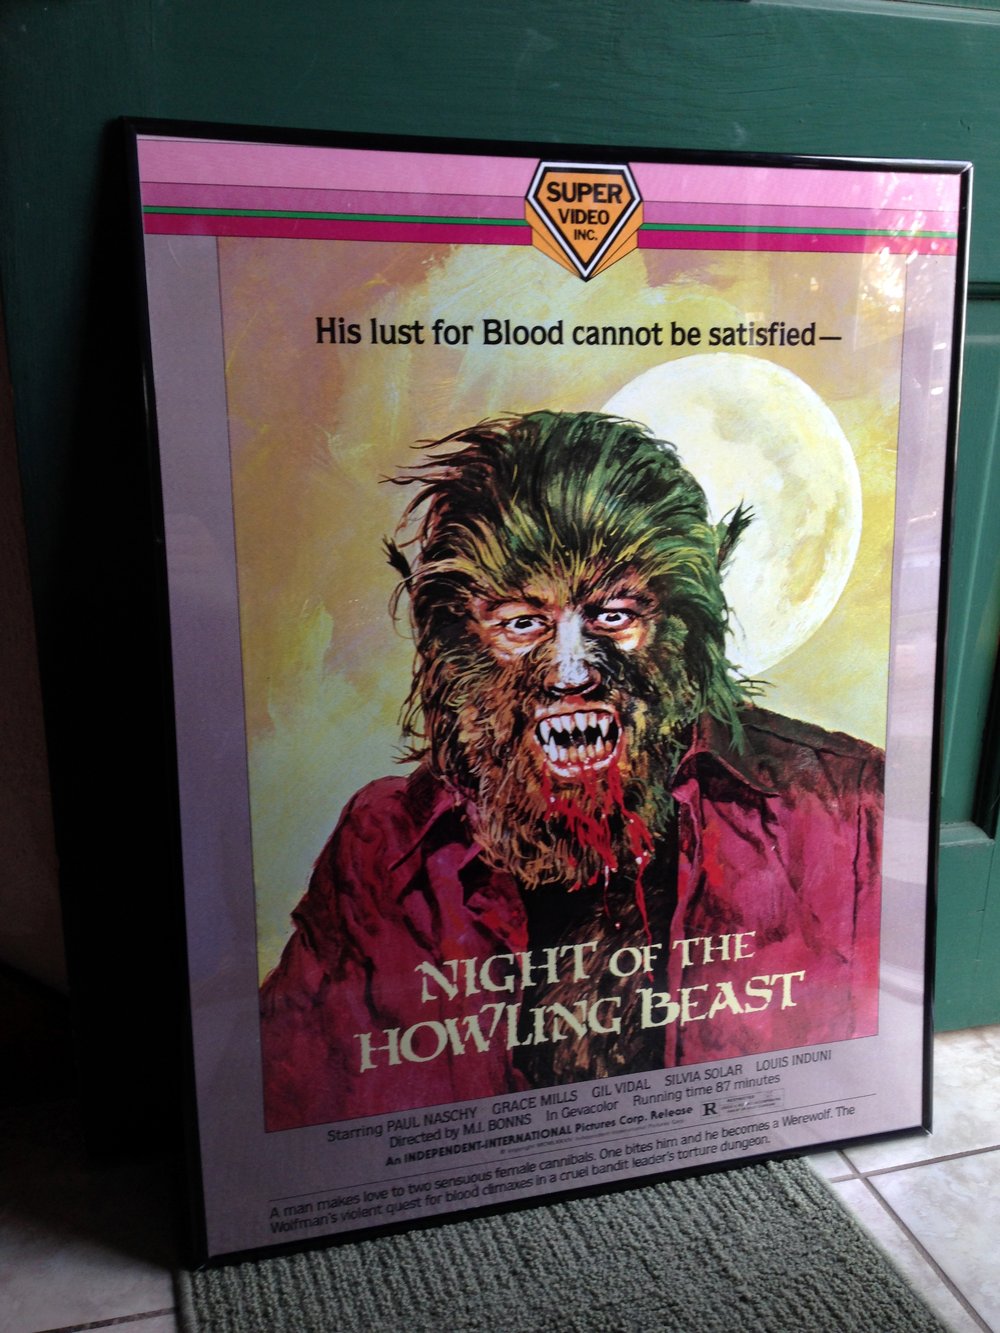 1975 NIGHT OF THE HOWLING BEAST Super Video box art Poster VHS 24 x 36" Painted by BASIL GOGOS!